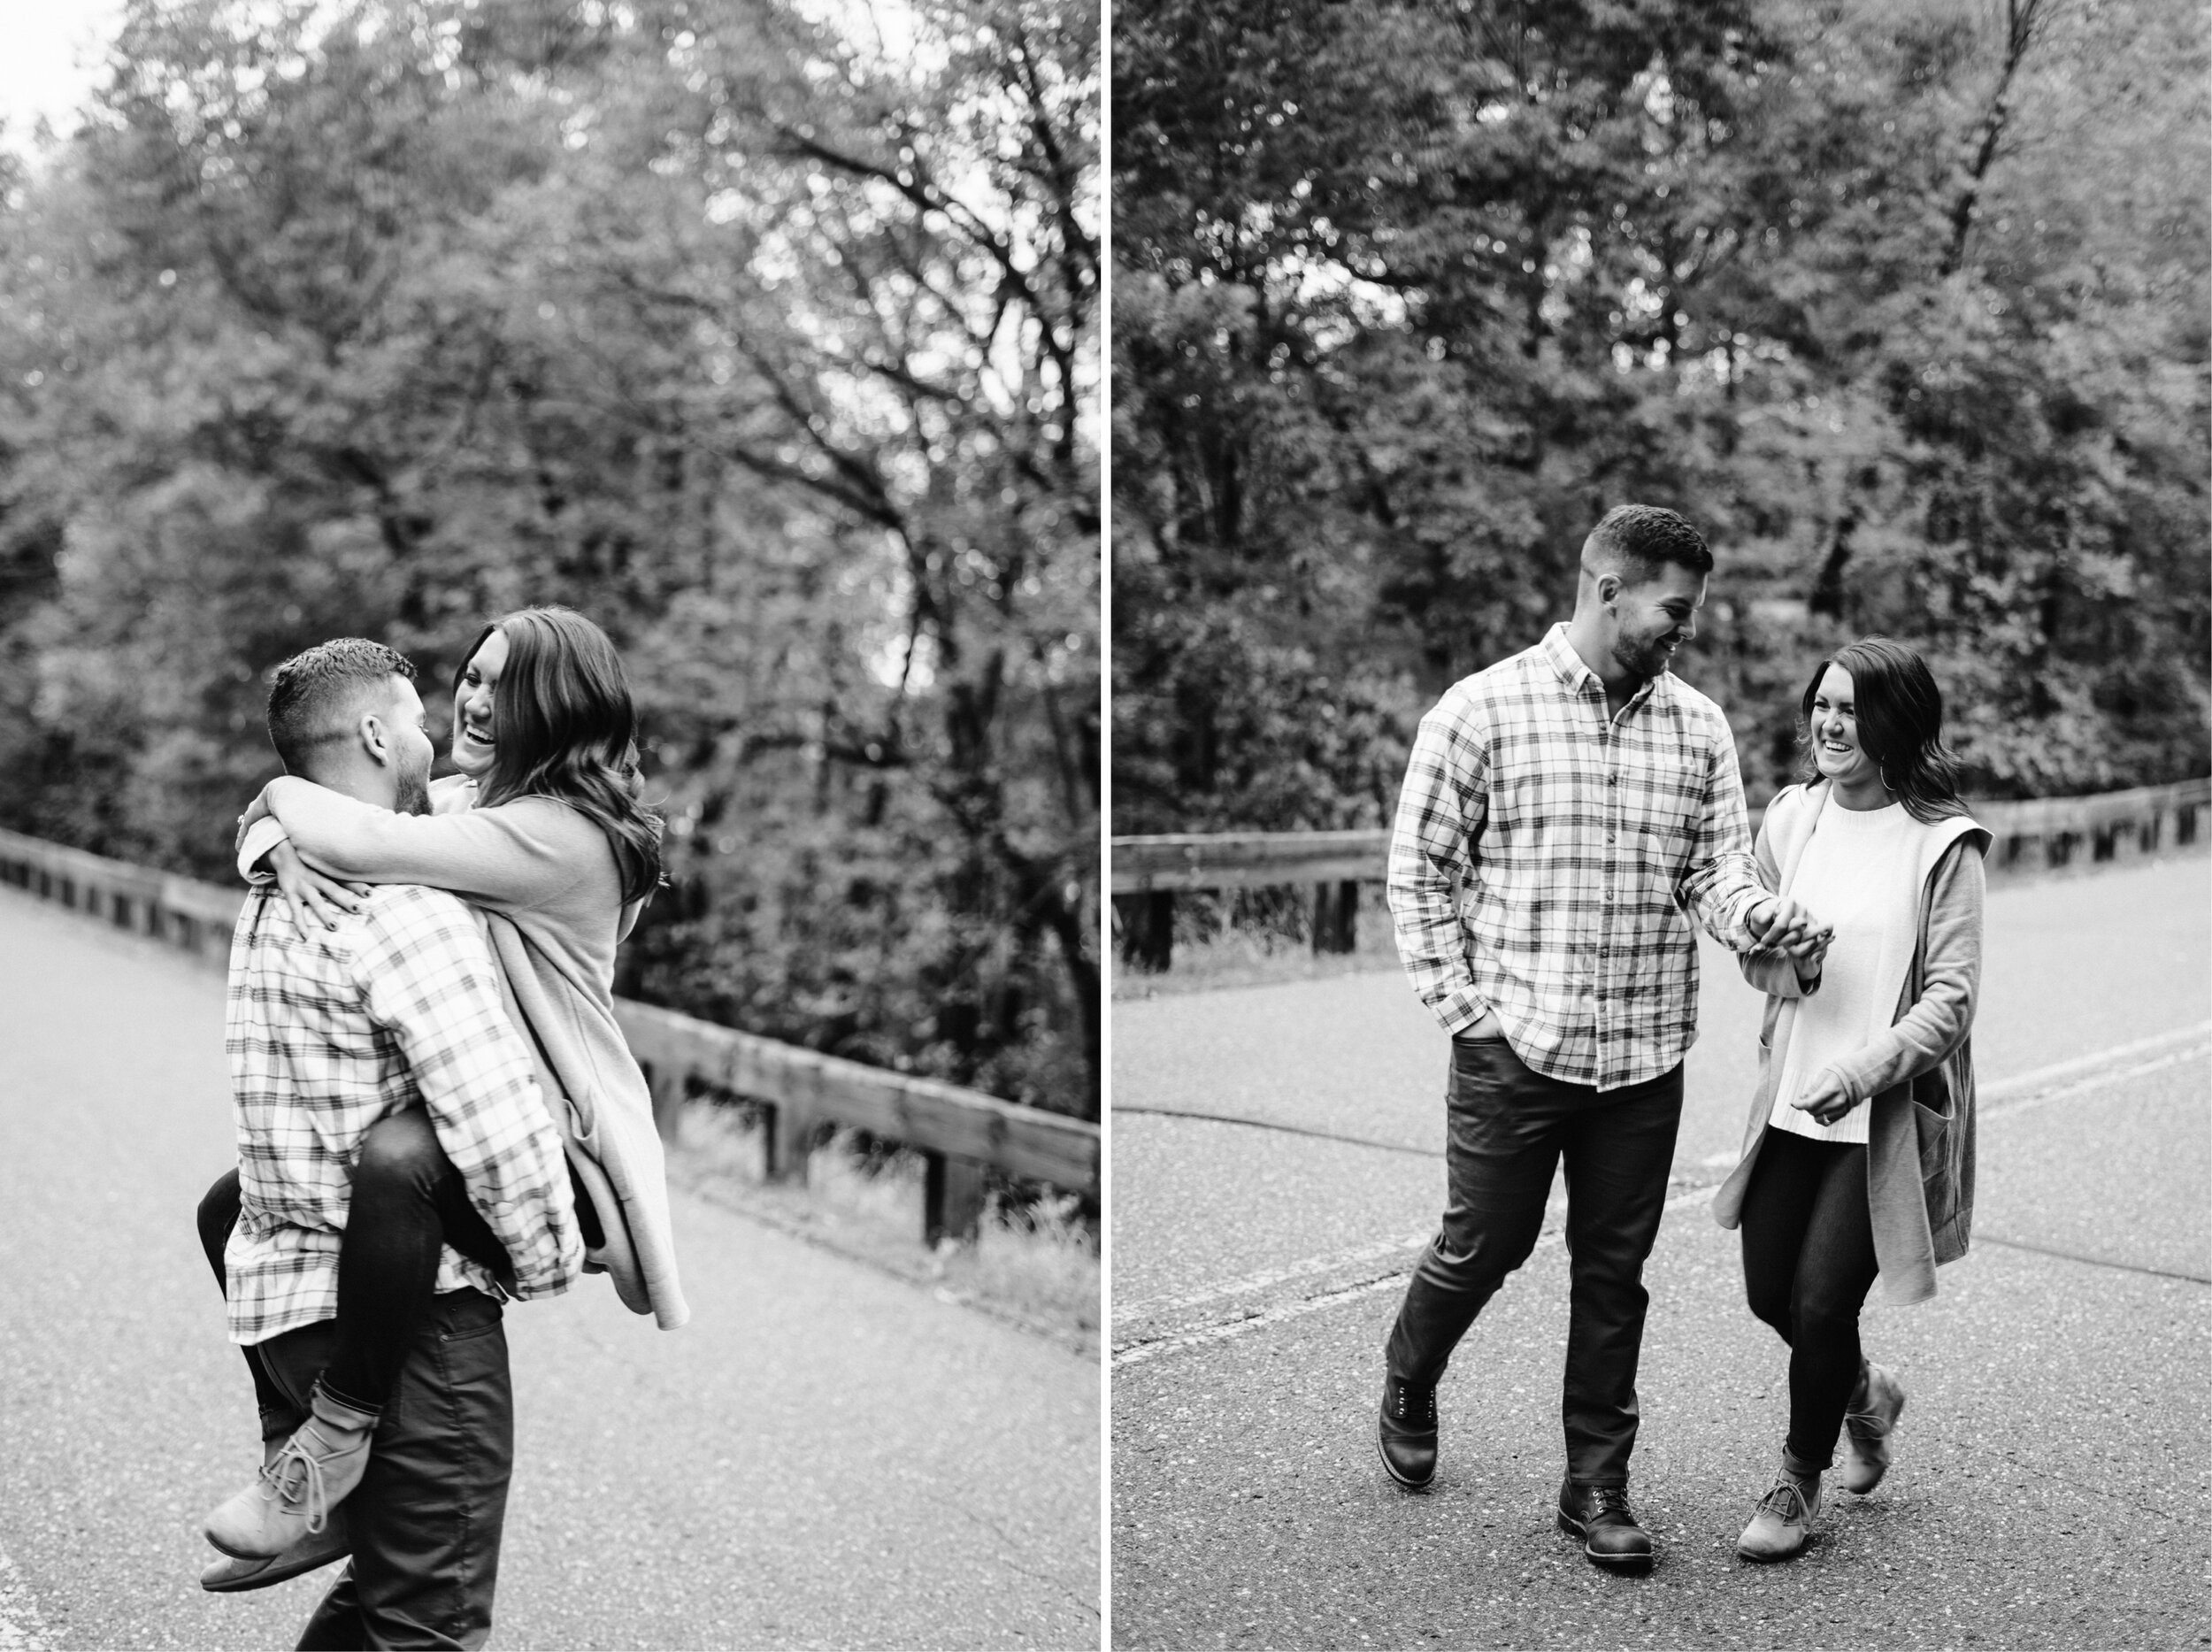 03_taylors-falls-engagement-session-interstate-park-mckenzie-josh-22_taylors-falls-engagement-session-interstate-park-mckenzie-josh-19.jpg